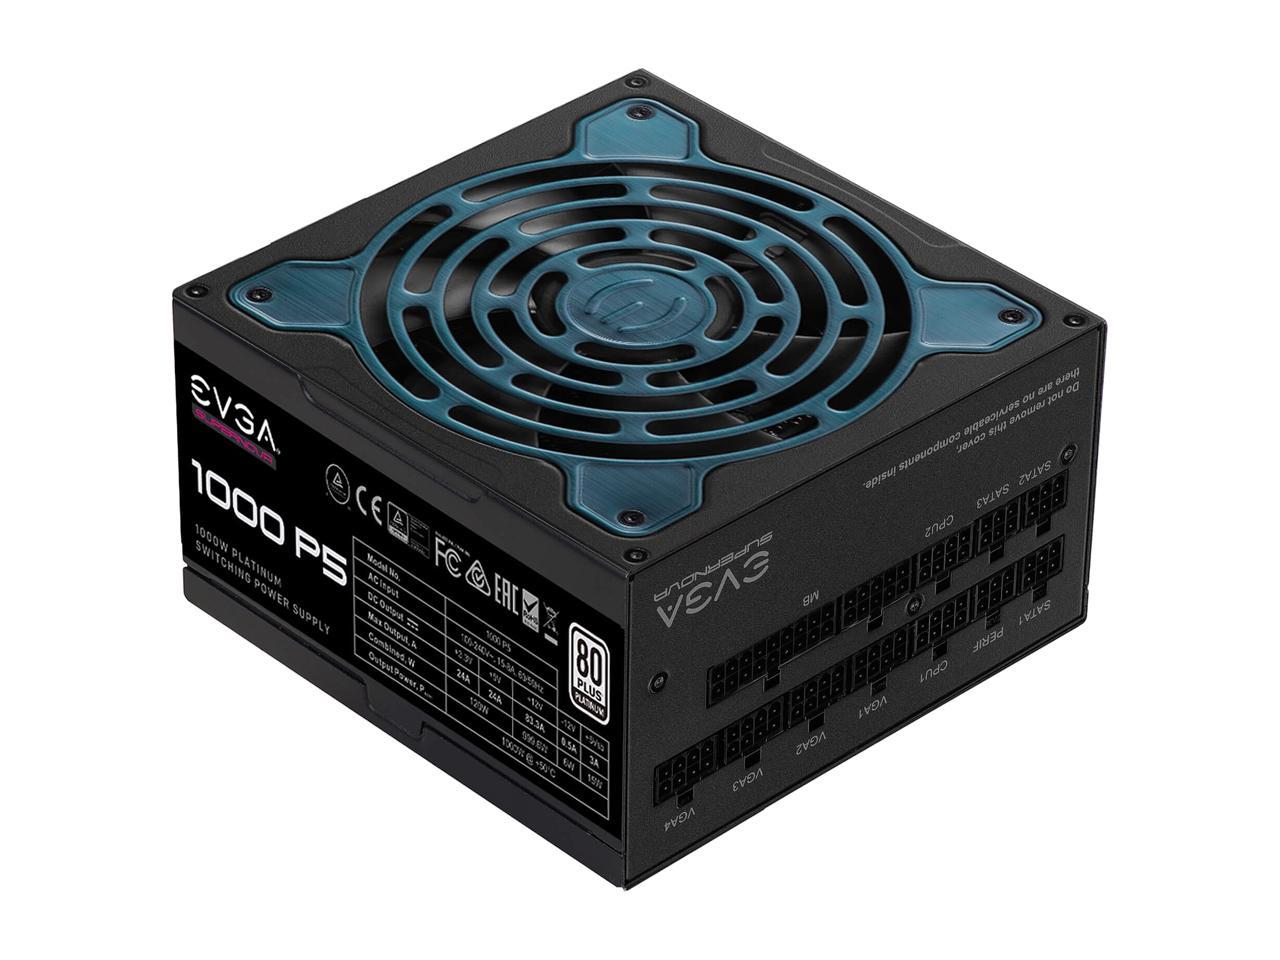 EVGA SuperNOVA 1000 P5, 80 Plus Platinum 1000W, Fully Modular, Eco Mode with FDB Fan, 10 Year Warranty, Includes Power ON Self Tester, Compact 150mm Size, Power Supply 220-P5-1000-X1